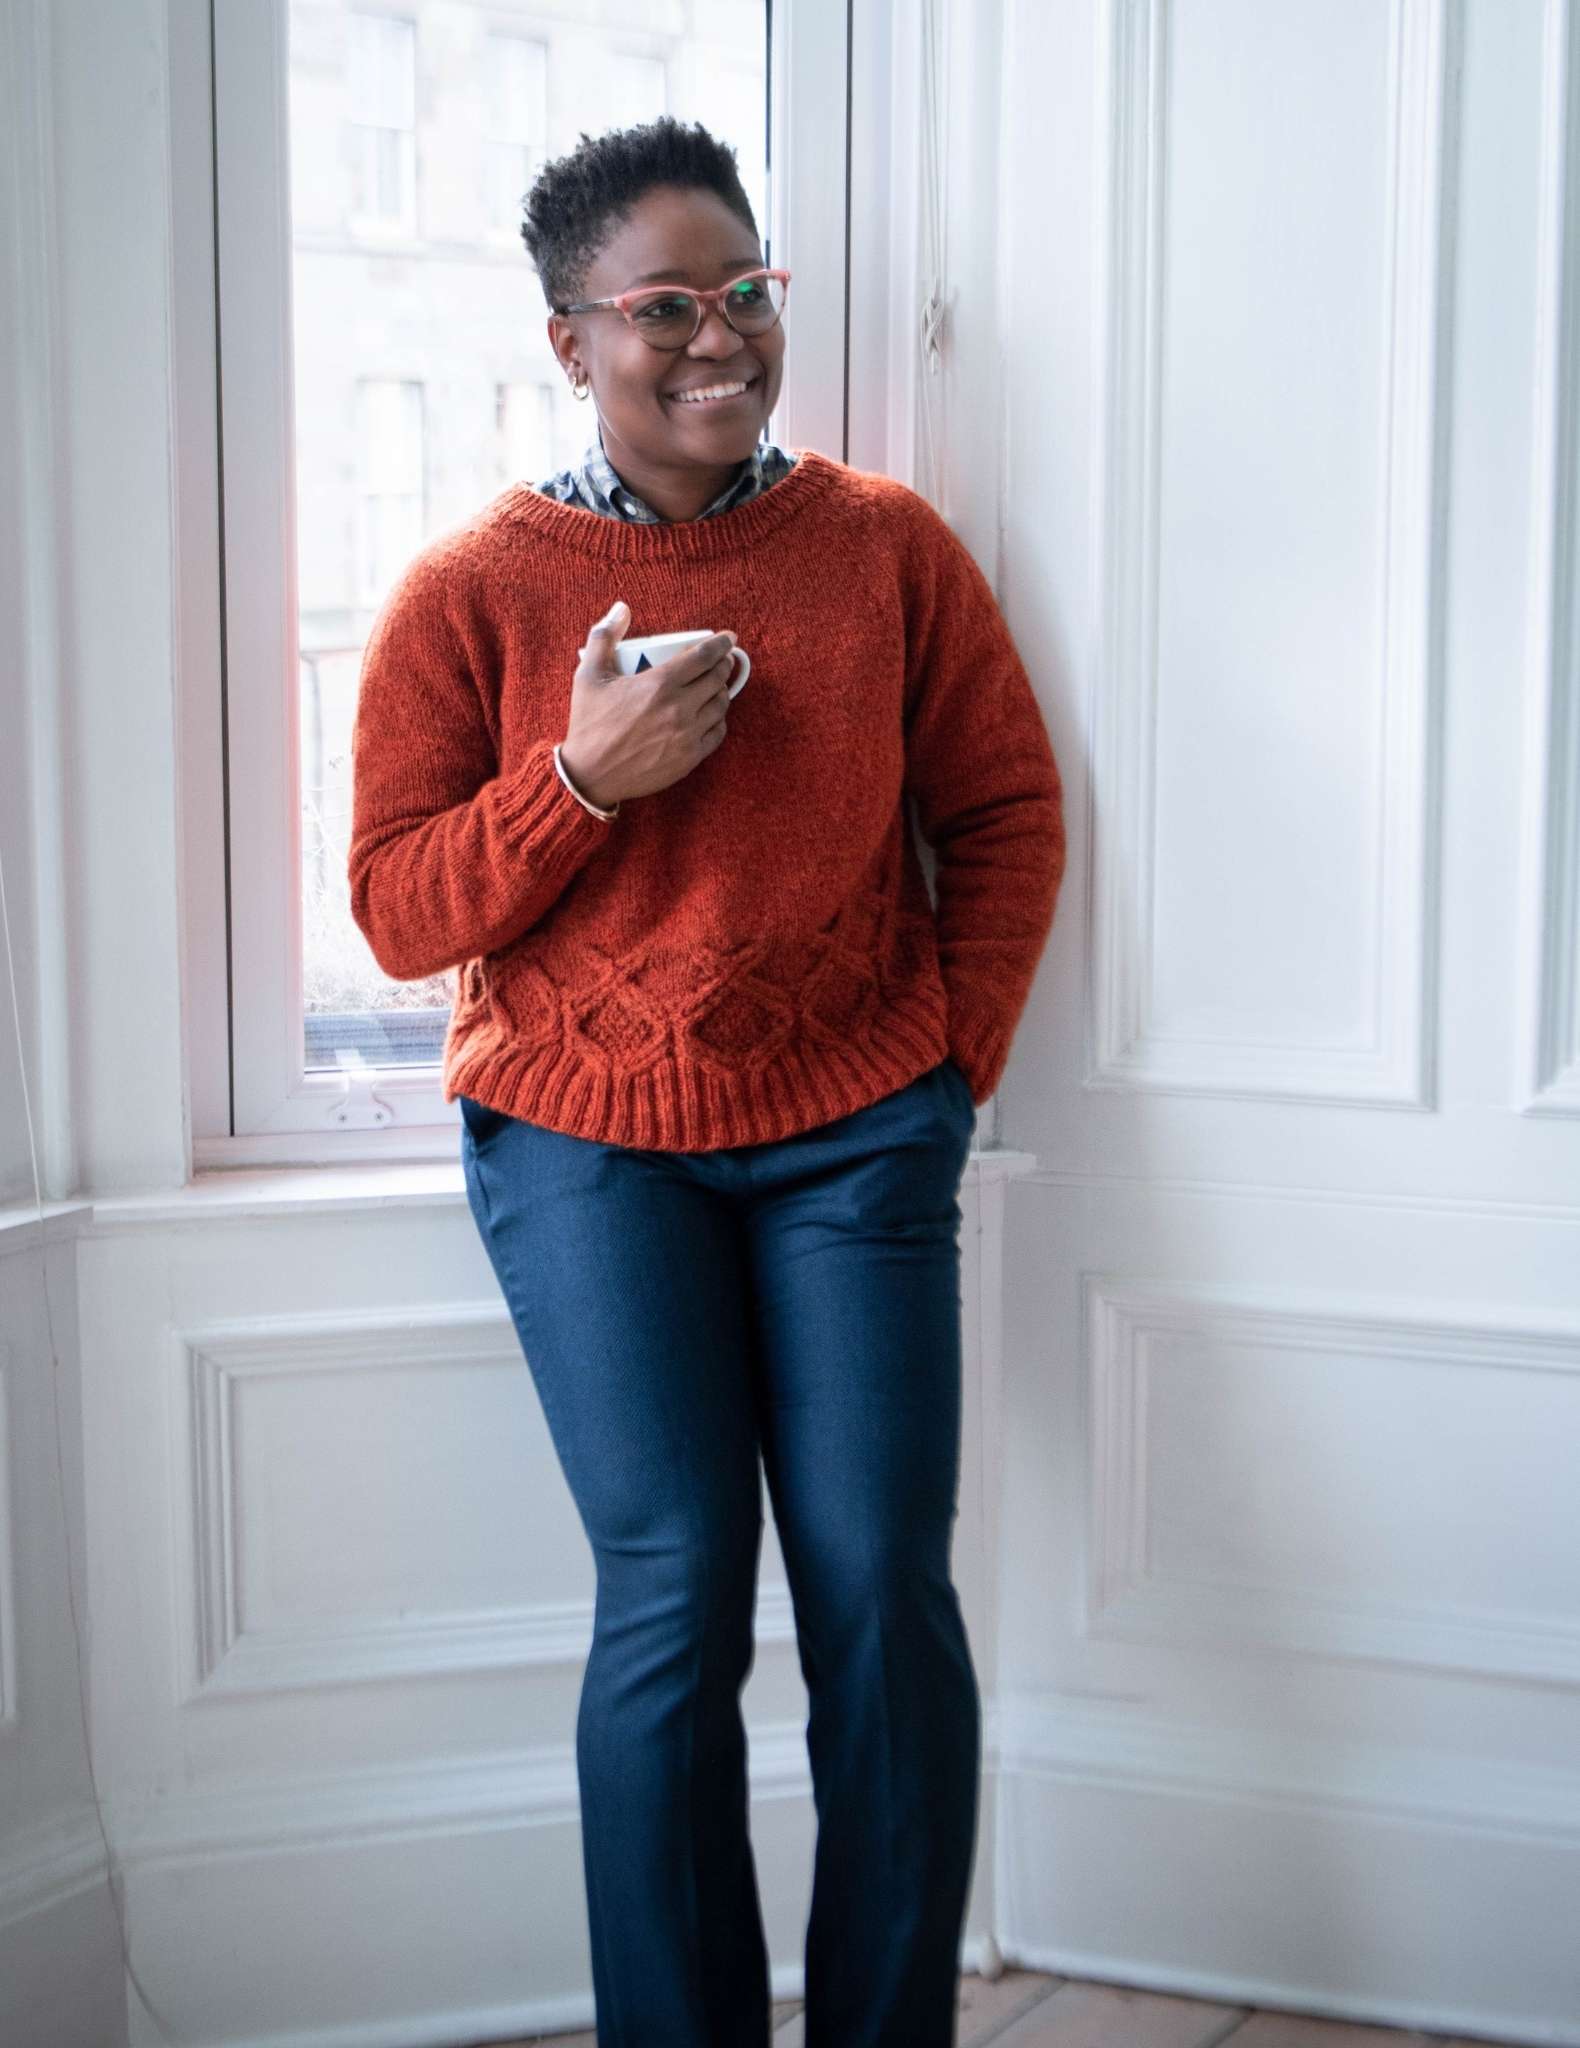 A black woman relaxes against a white indoor wall, wearing an orange cabled sweater and jeans and holding a mug in her right hand.